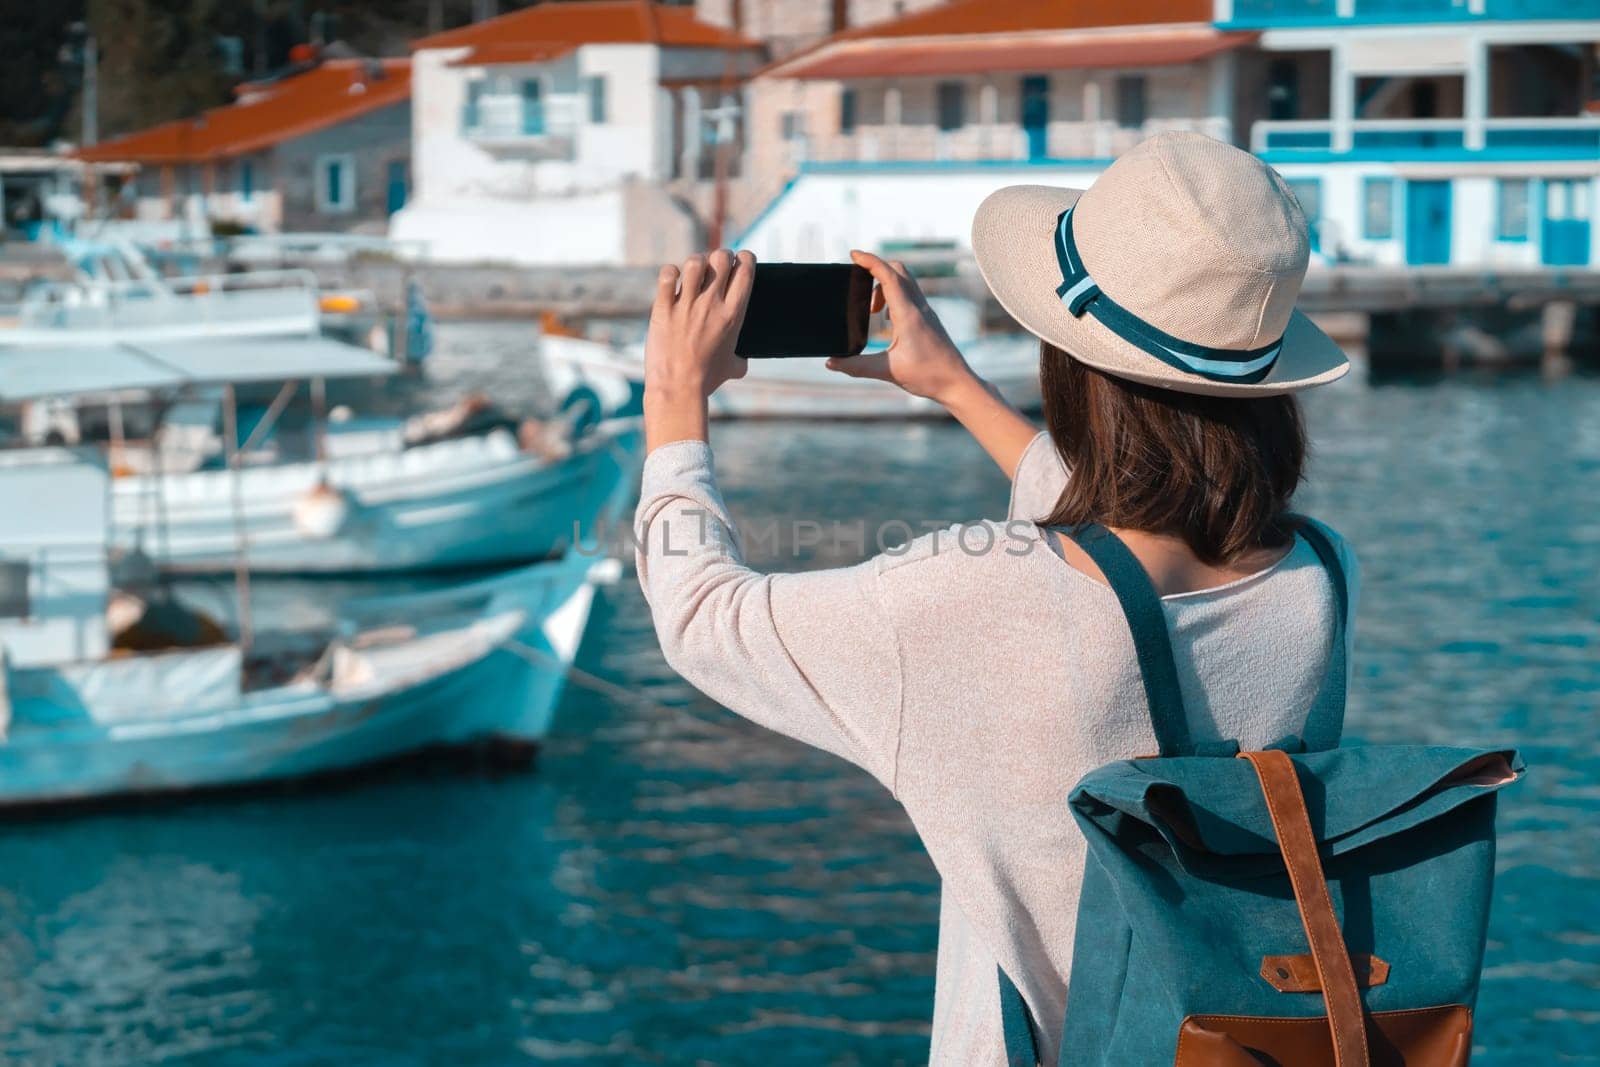 A young girl in a hat and with a backpack makes a photo of a beautiful bay with yachts and boats on the sea while traveling, a tourist walks along the shore next to the ocean and takes pictures.